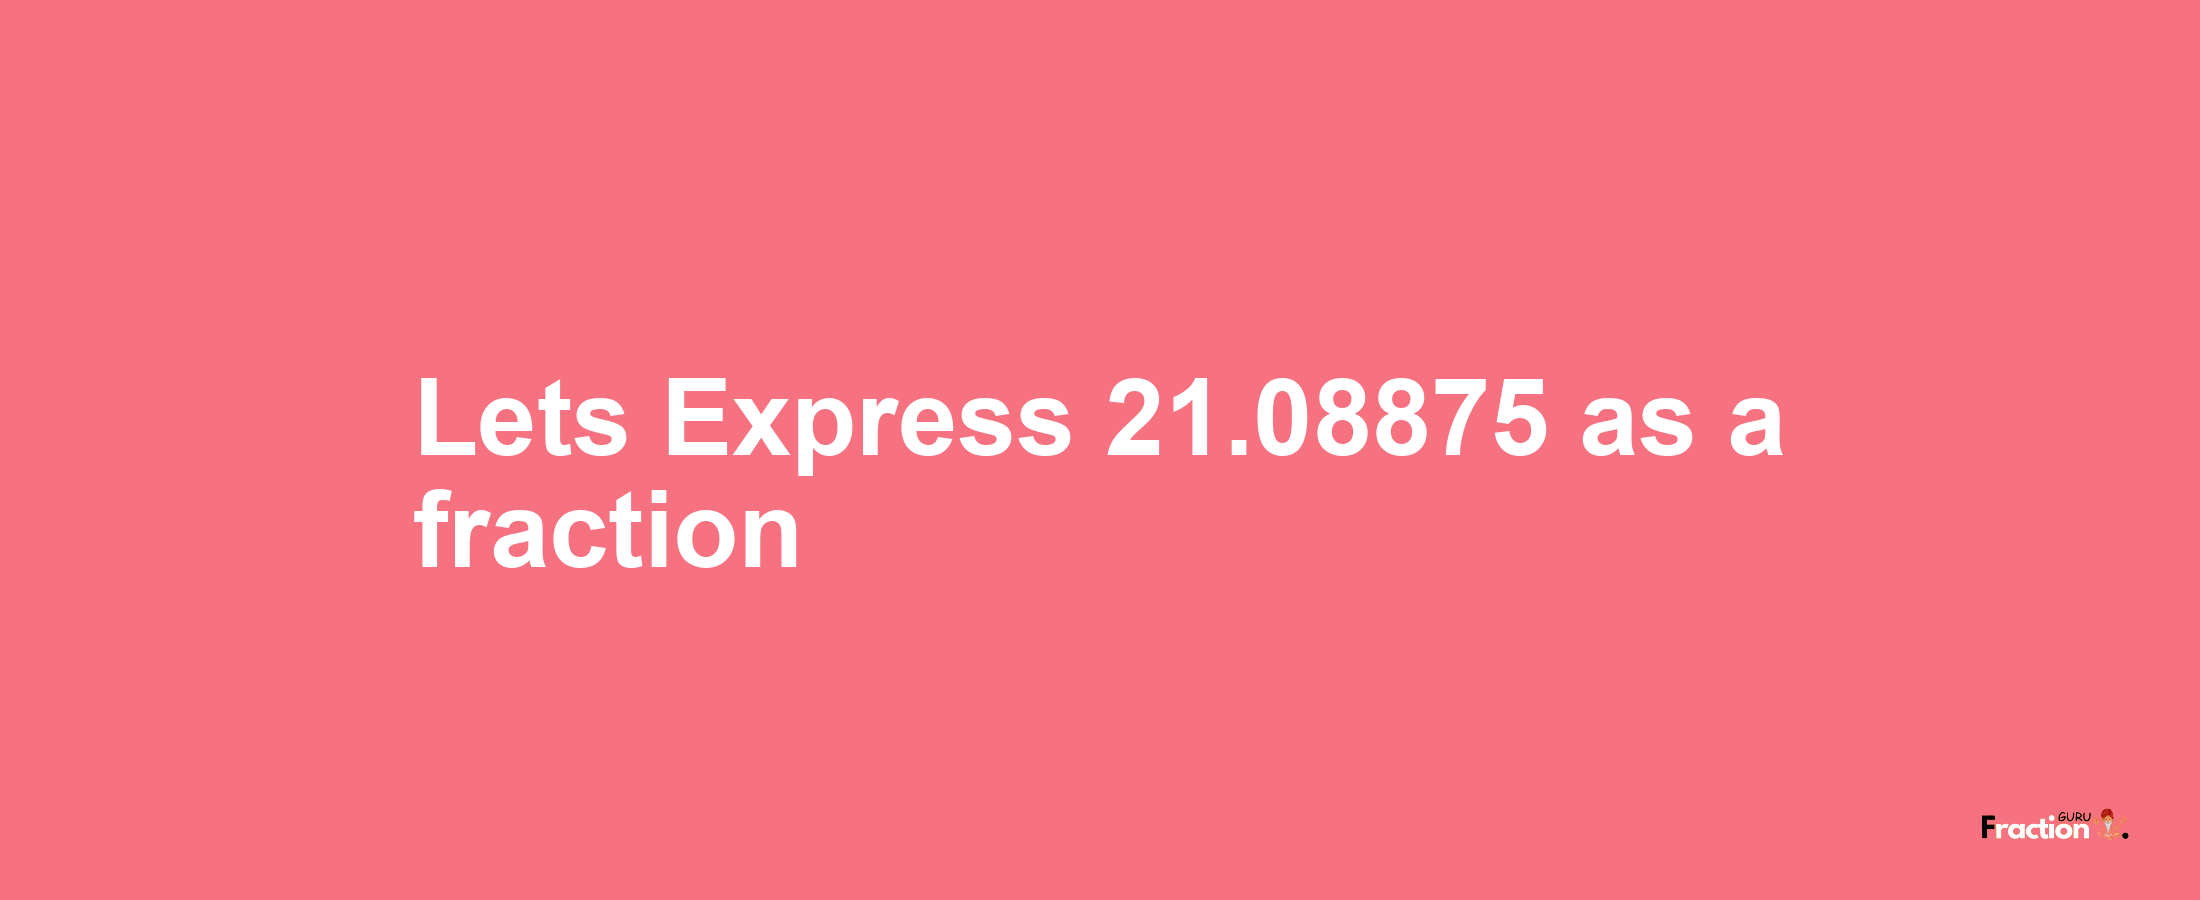 Lets Express 21.08875 as afraction